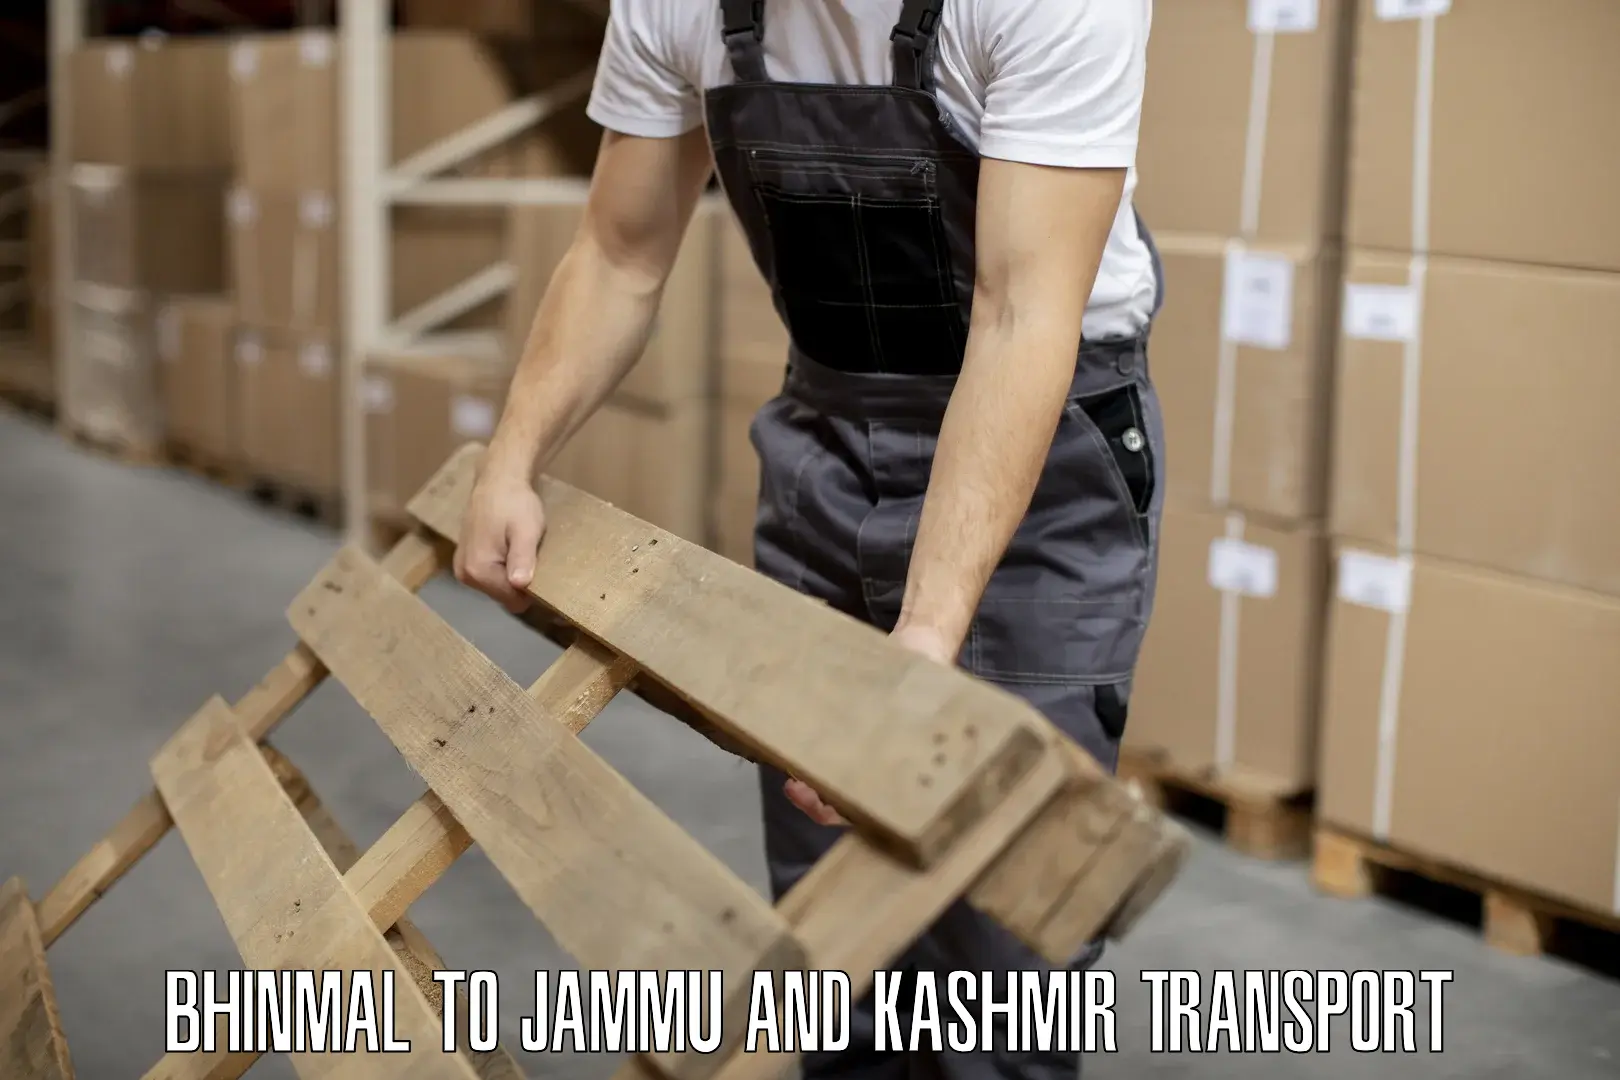 Domestic transport services Bhinmal to Rajouri